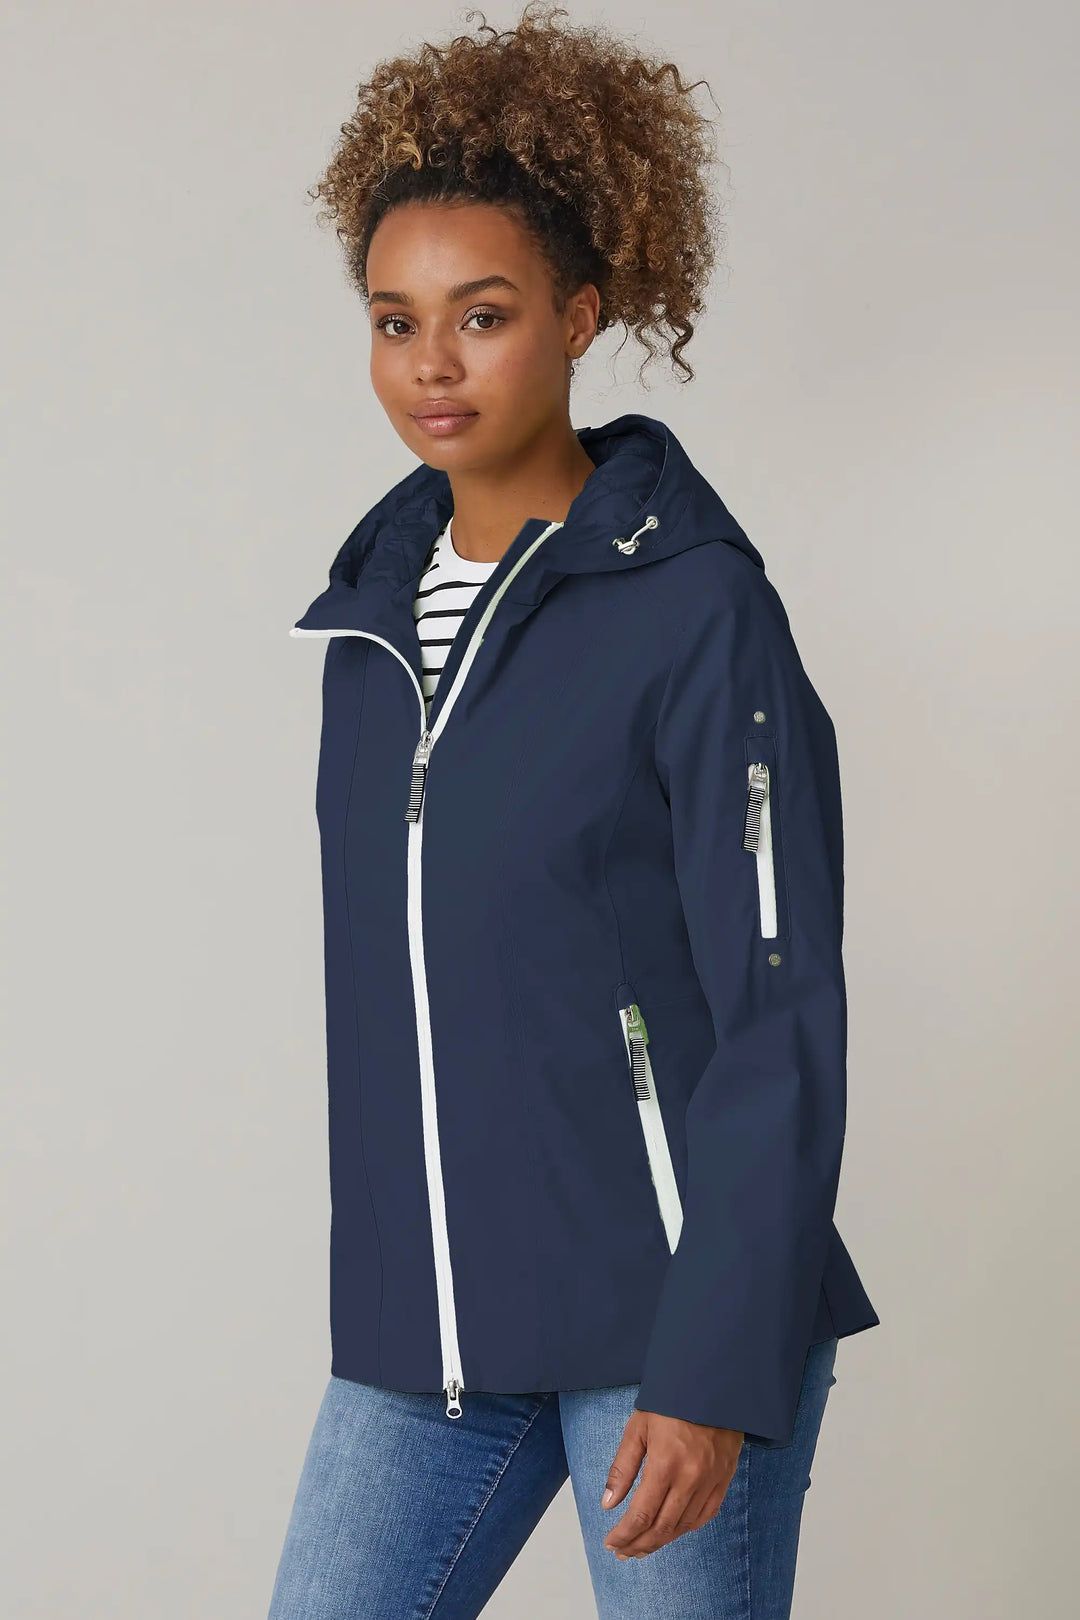 A model sports a navy windbreaker with a hood and zippered pockets, layered over a striped shirt for a casual, functional spring outfit, style 0124-2494-88-50